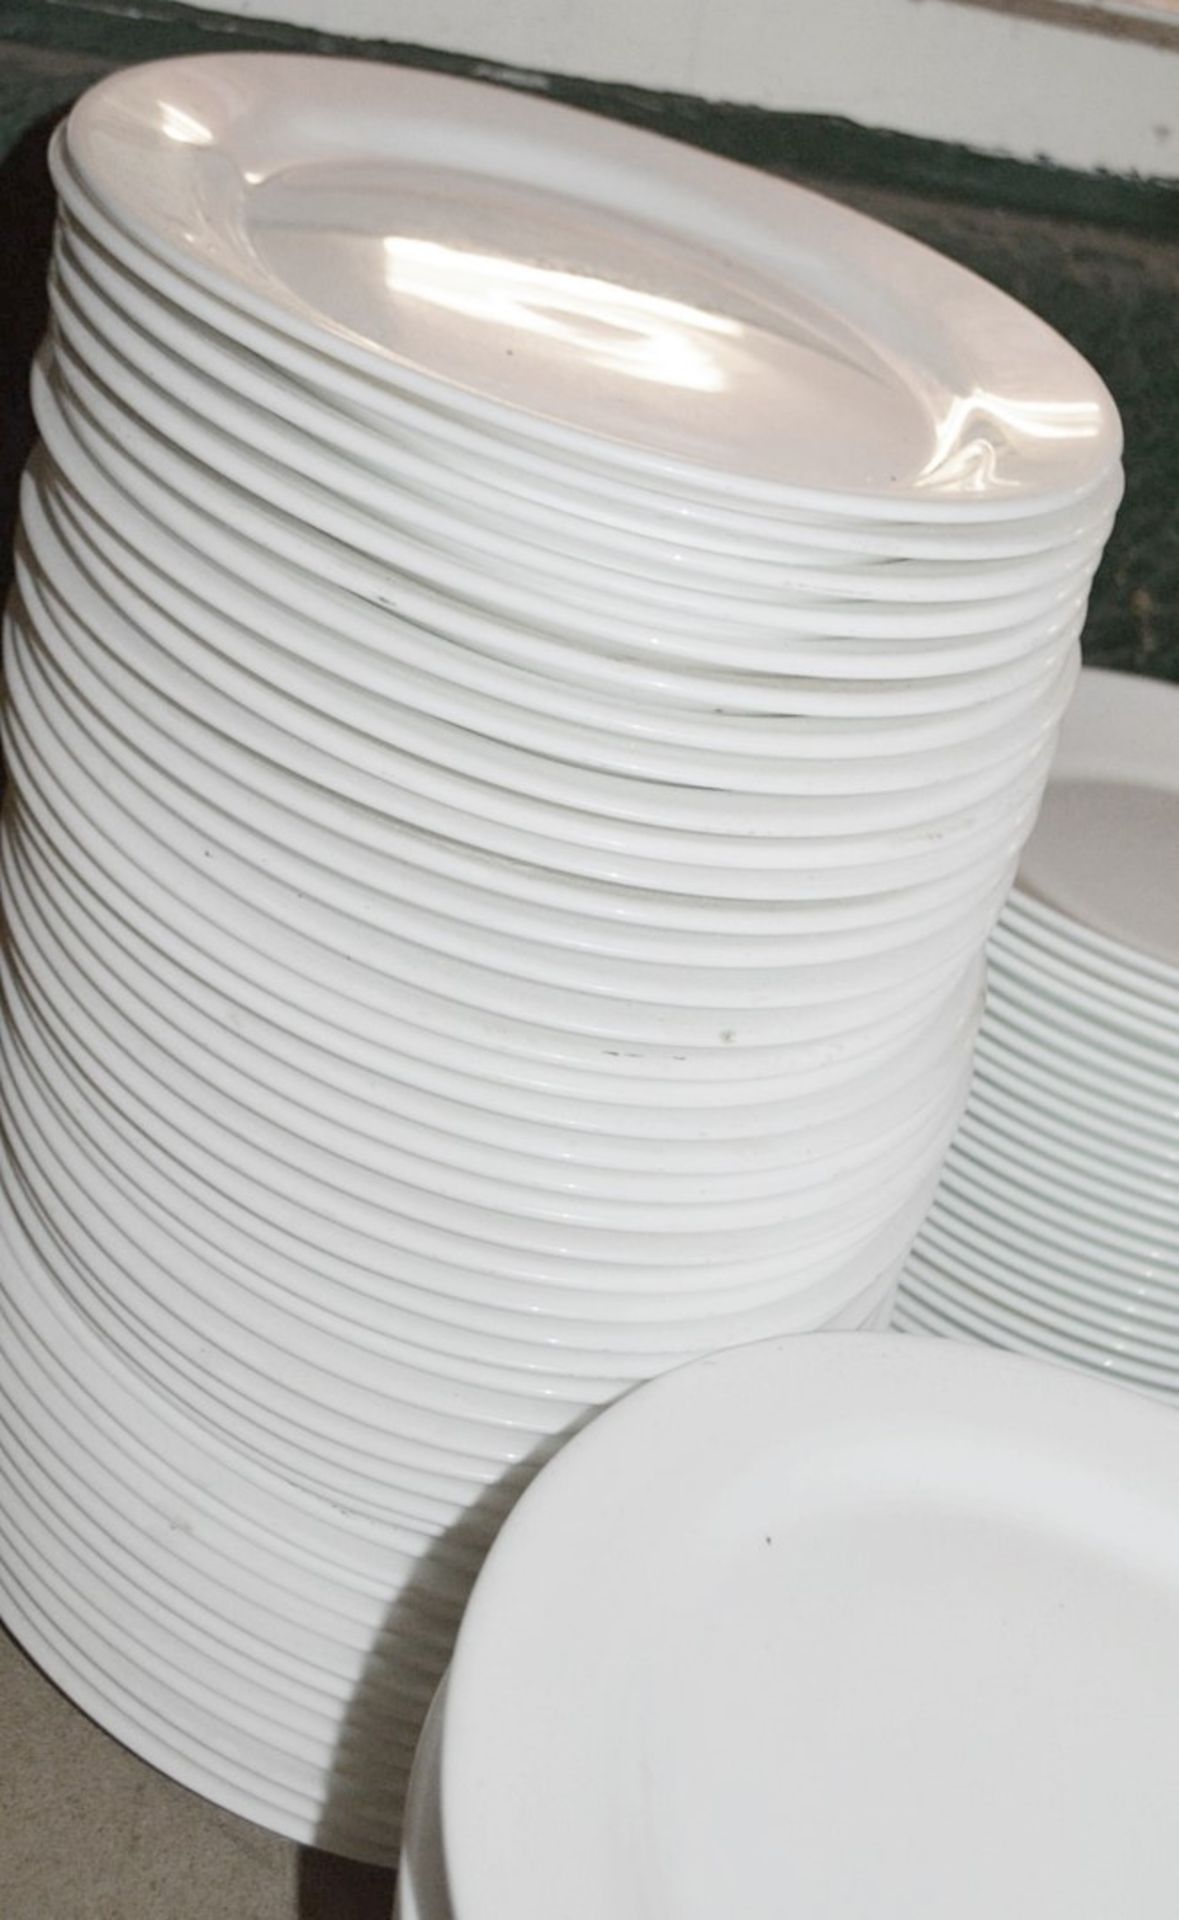 50 x Commercial Oval Dining Platter Plates - Dimensions: 31 x 23cm - Pre-owned, From A London - Image 3 of 4